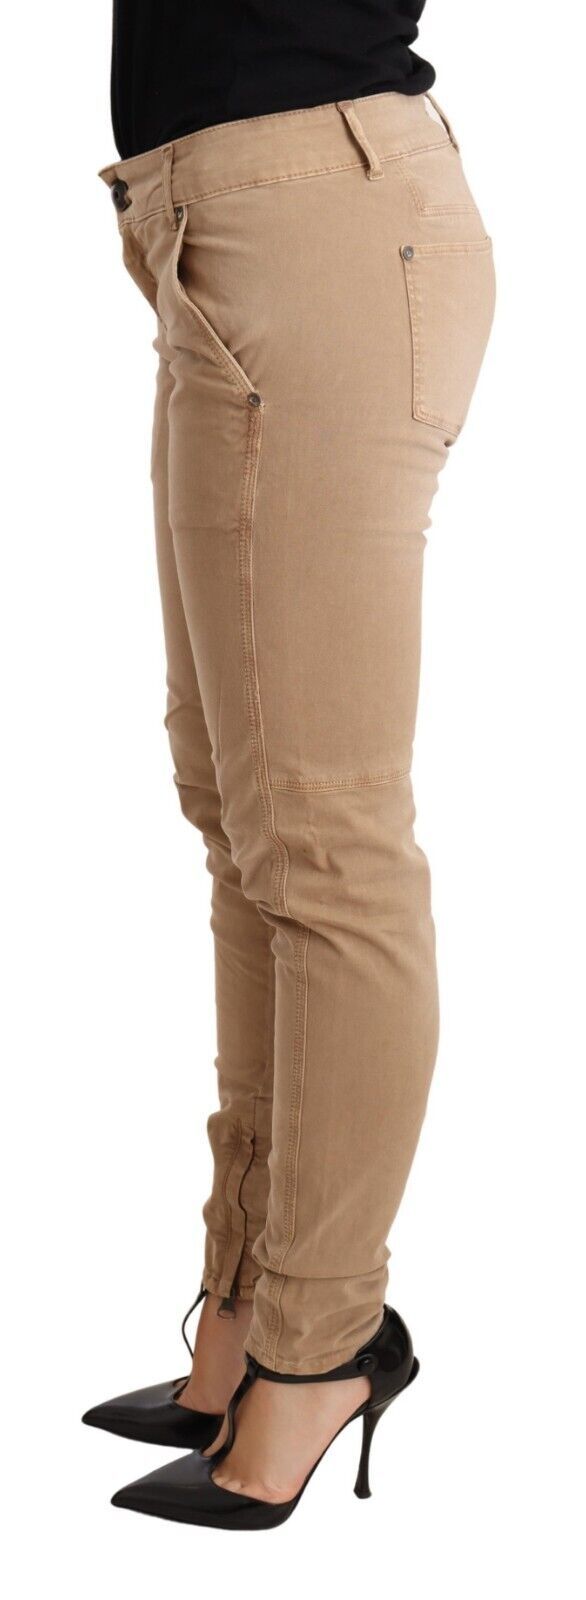 Ermanno Scervino Chic Low Waist Skinny Cotton Trousers